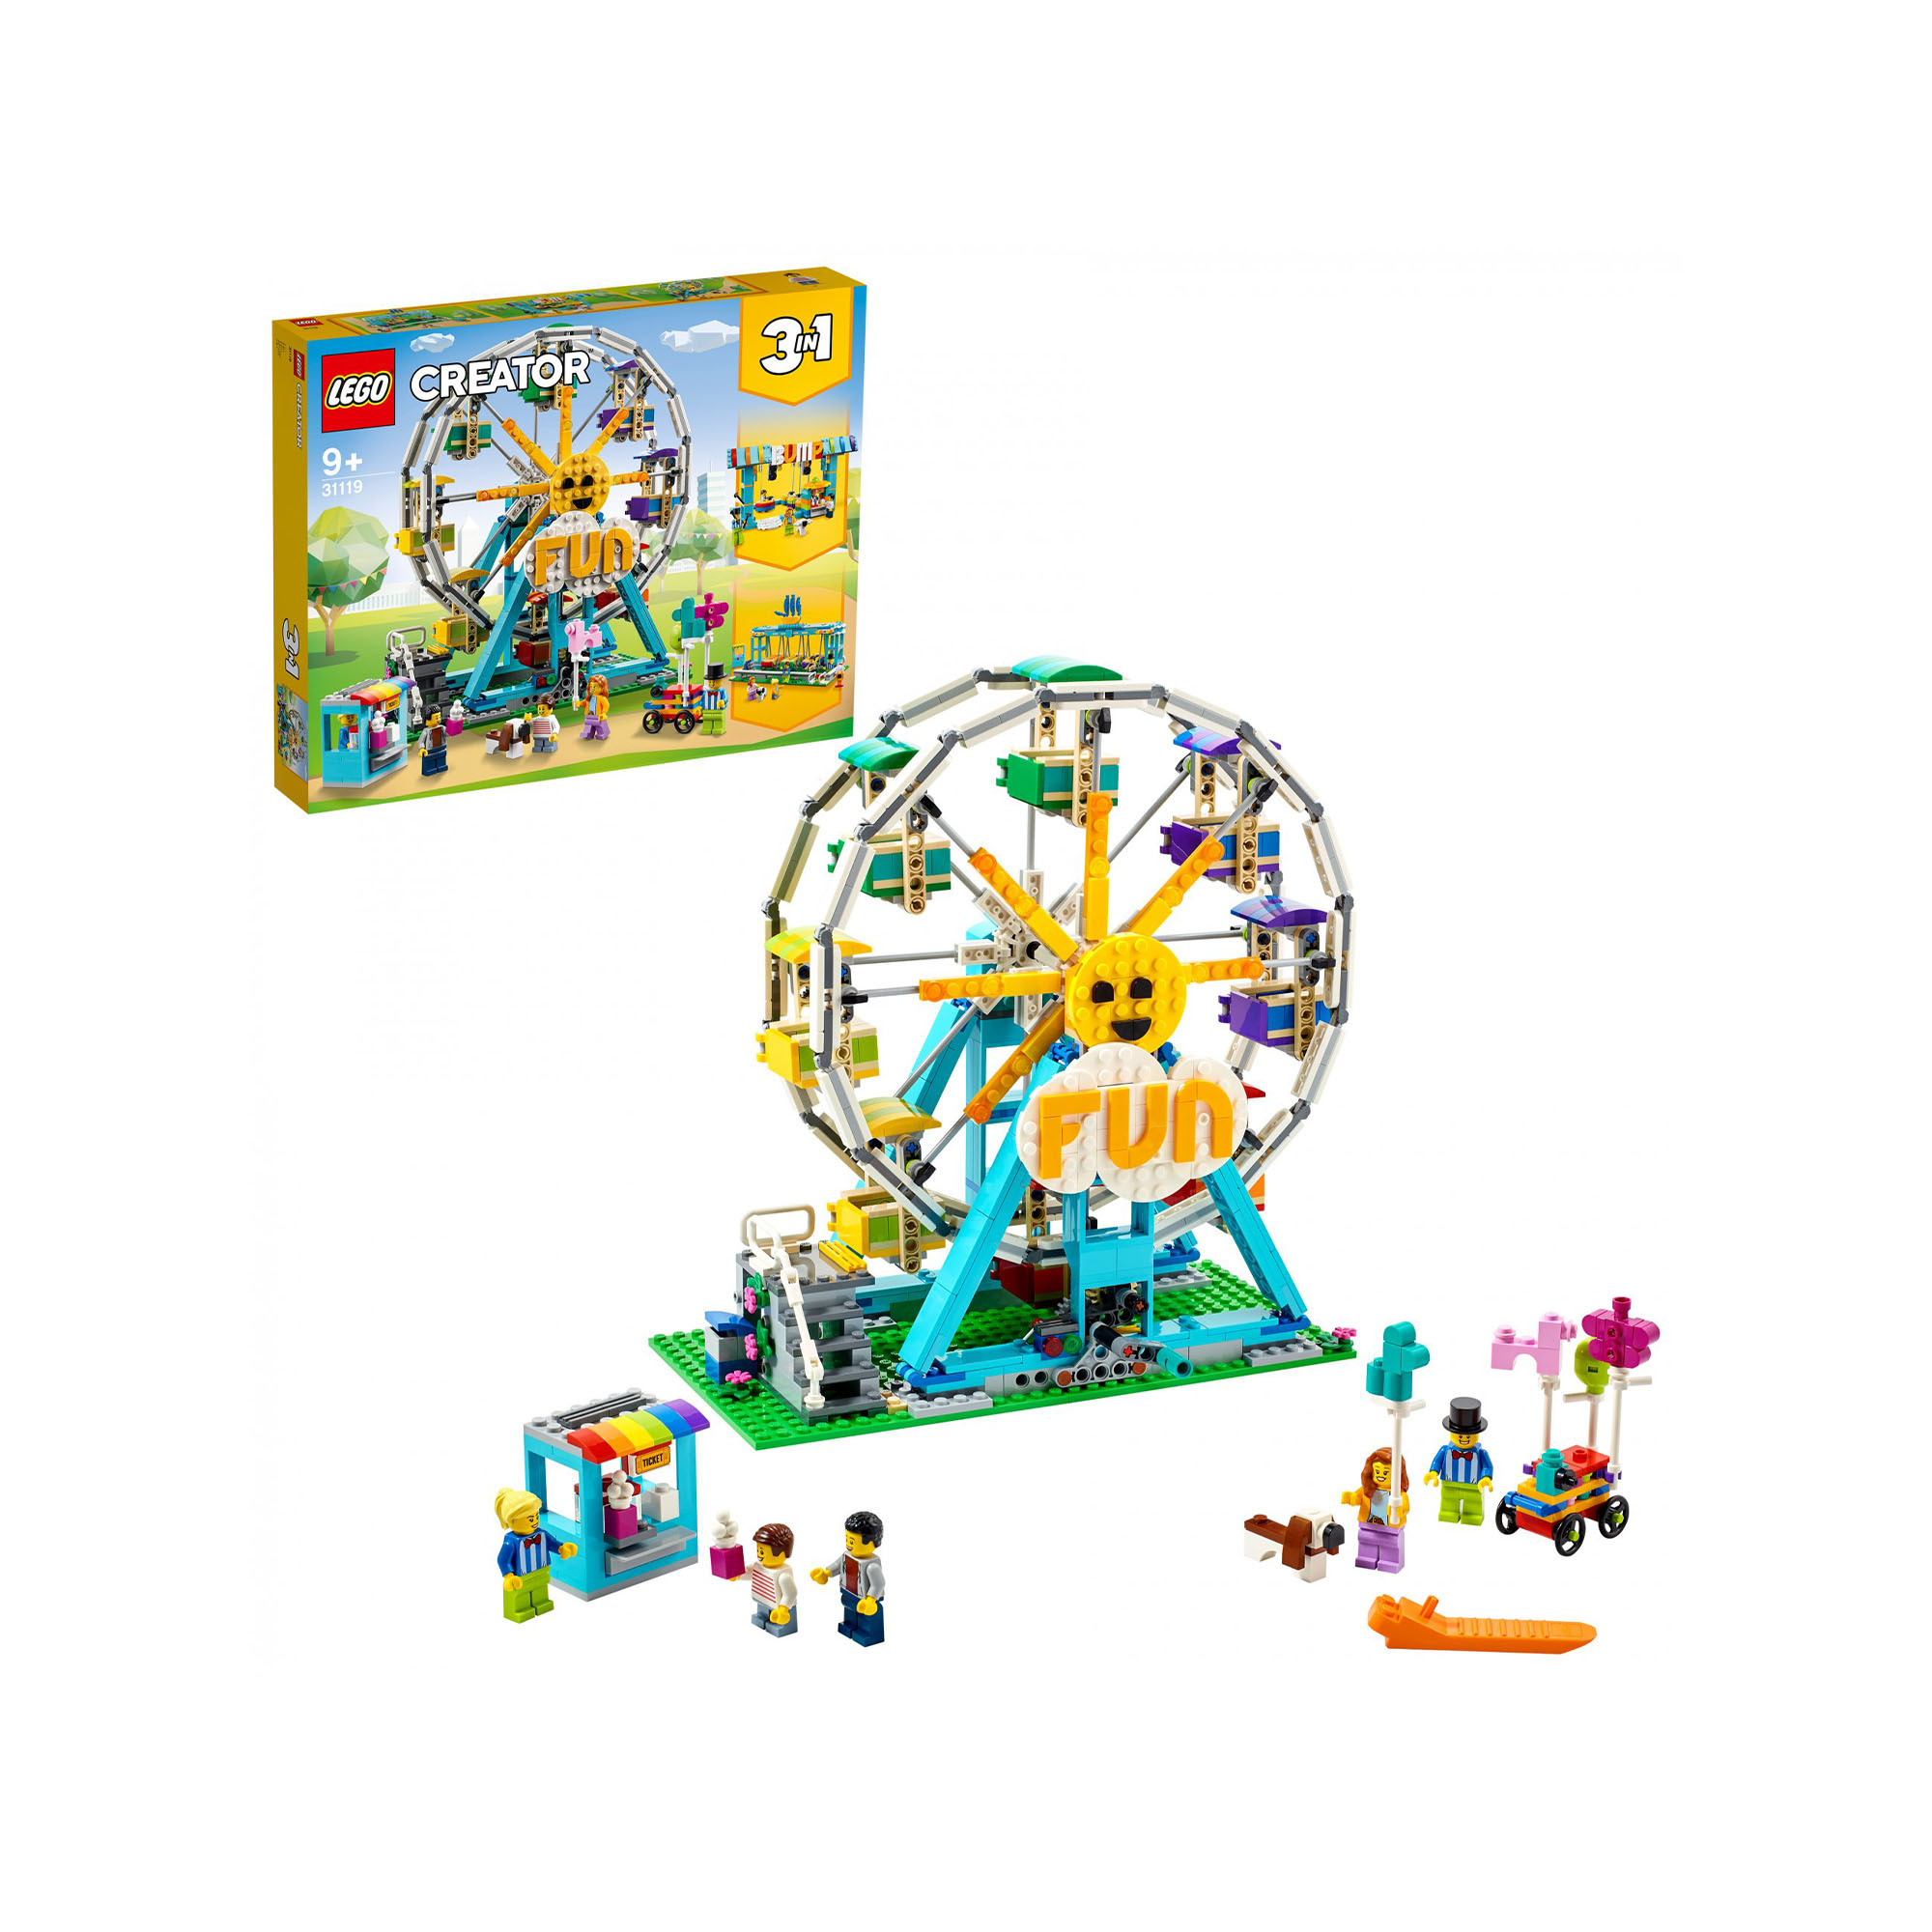 LEGO Creator 3 in 1 Ruota Panoramica, Autoscontro e Giostra, Playset Parco Gioch 31119, , large